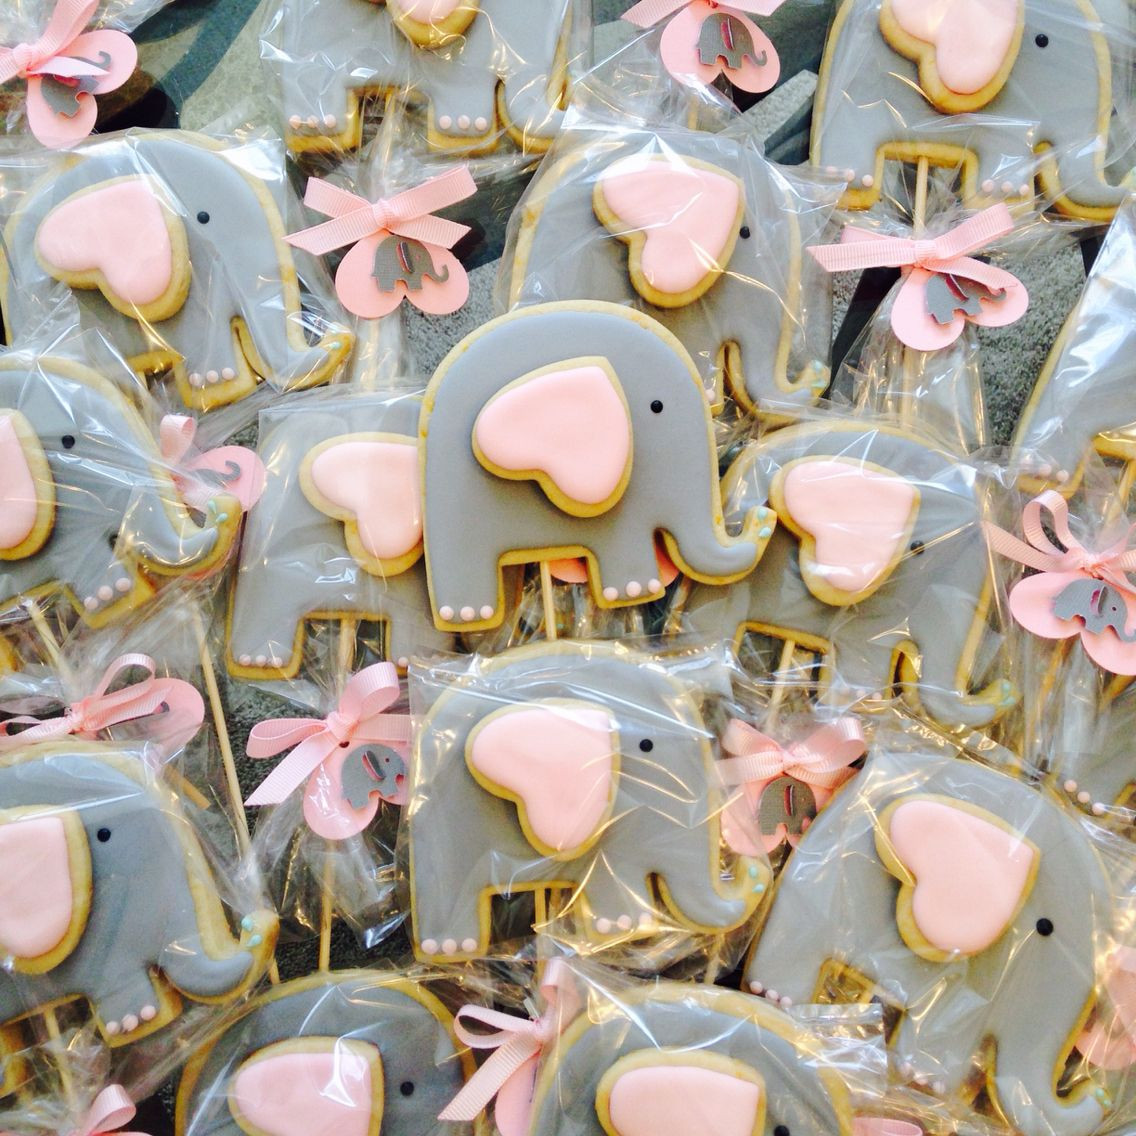 Baby Elephant Party Supplies
 Elephant sugar cookies elephant party favors baby shower